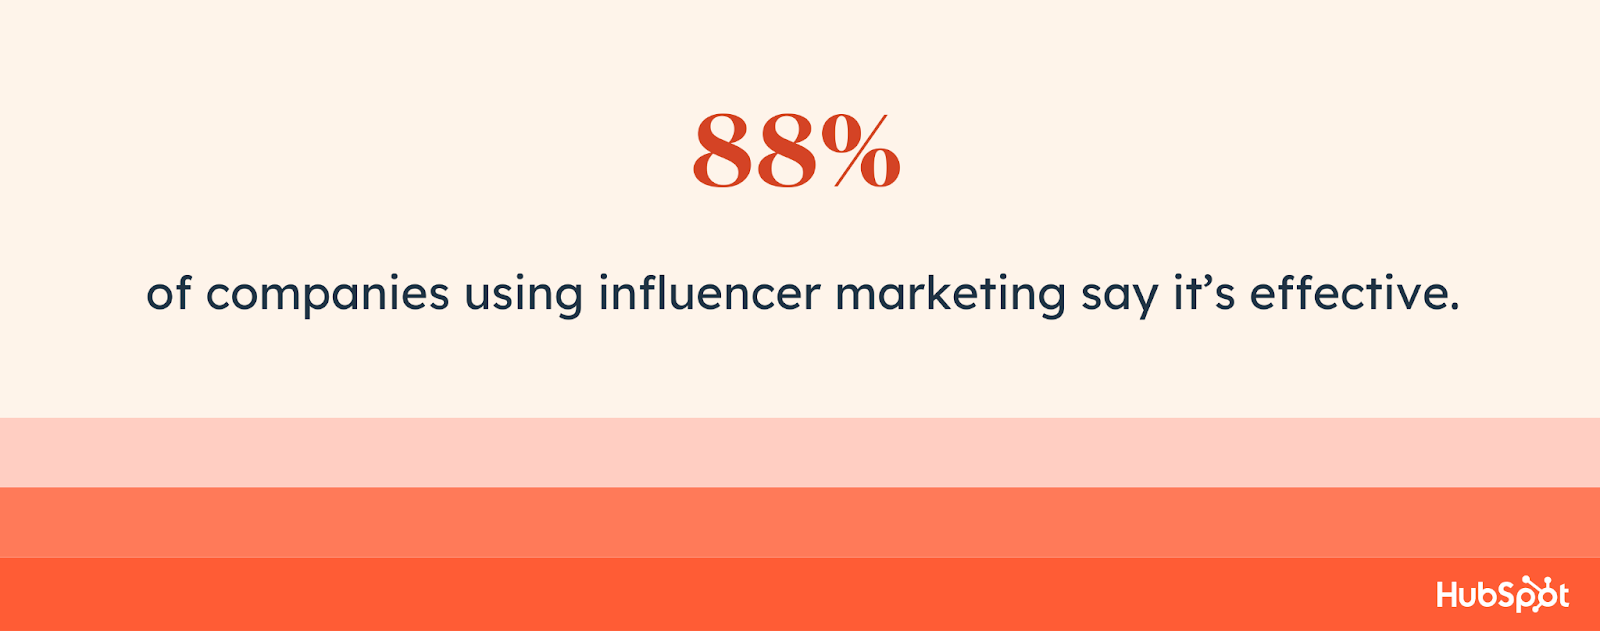 88% of companies using influencer marketing say it’s effective